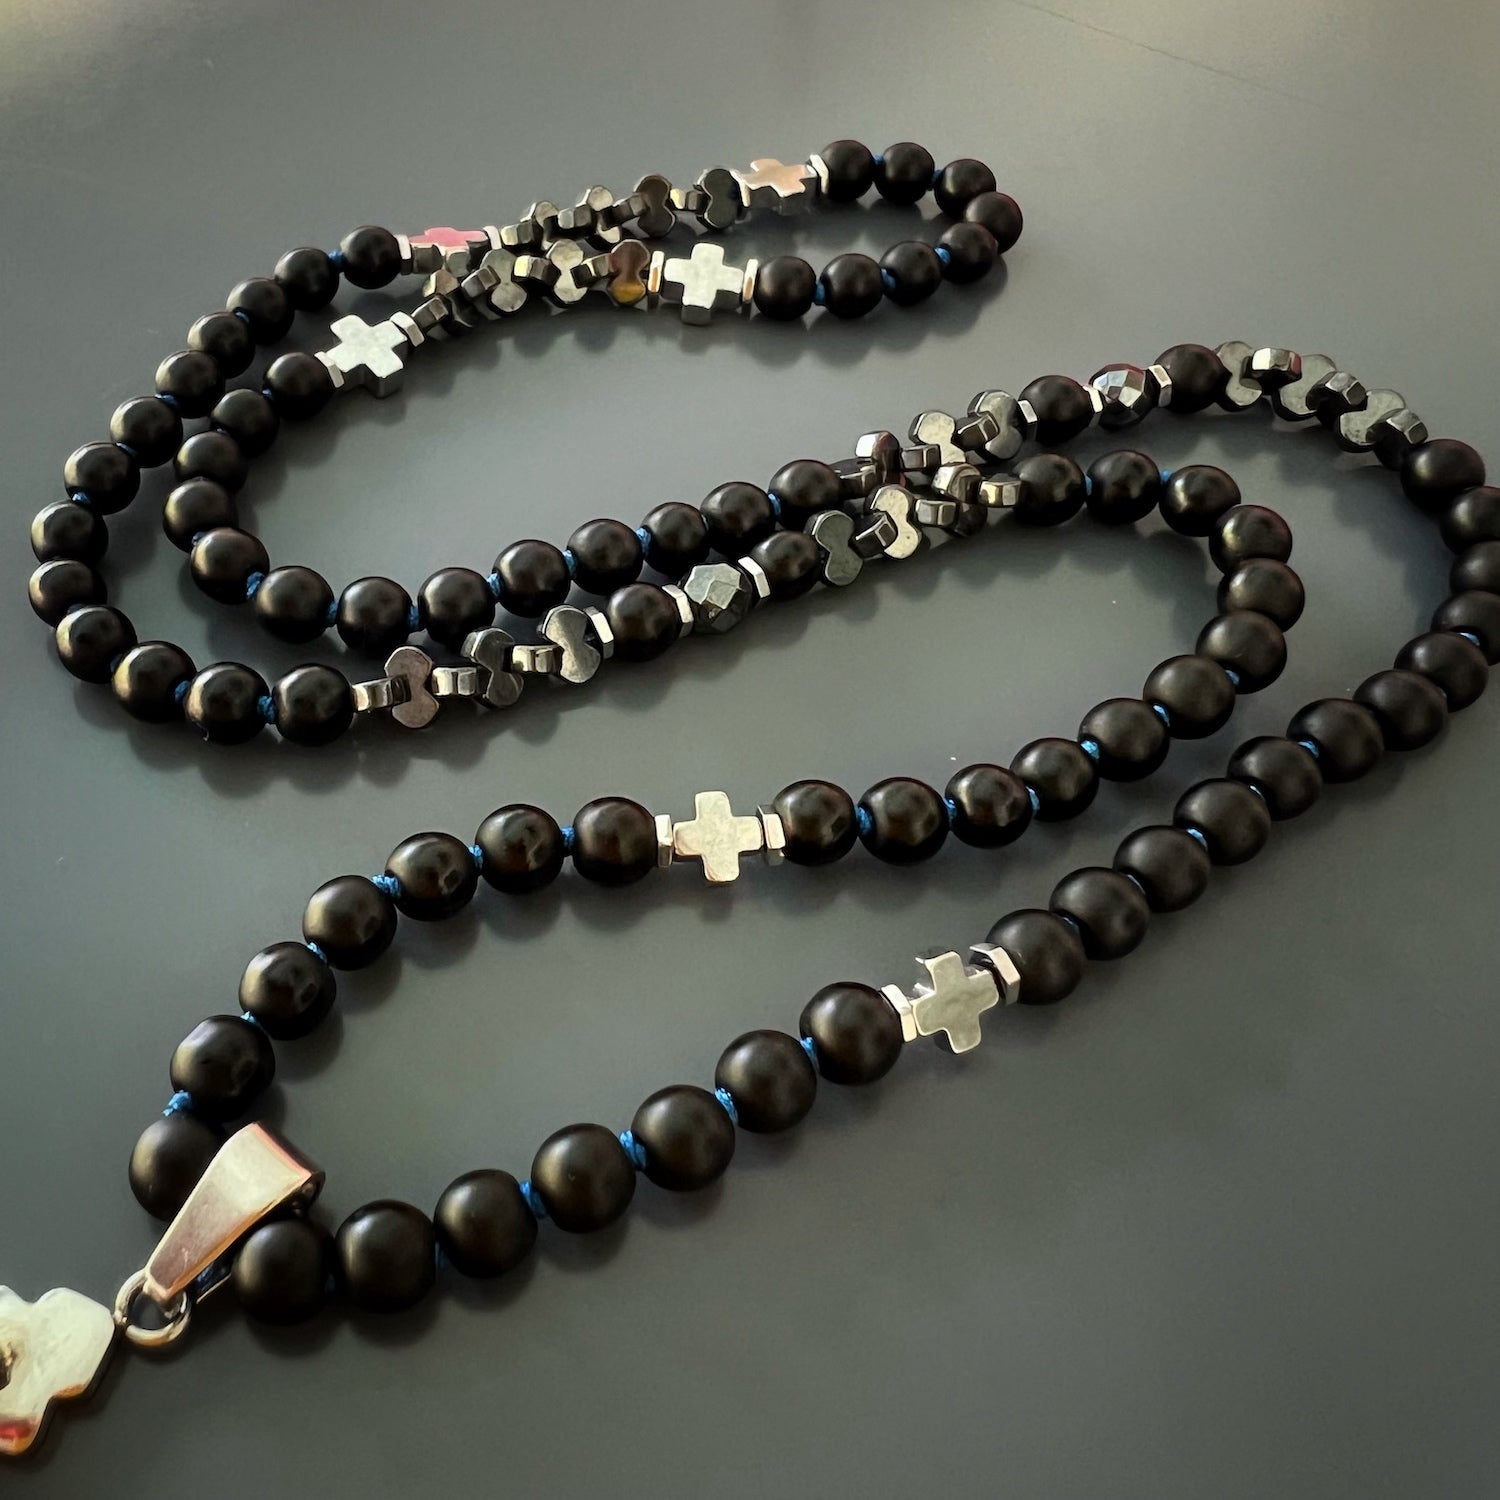 Necklace with Healing Hematite Stone Beads